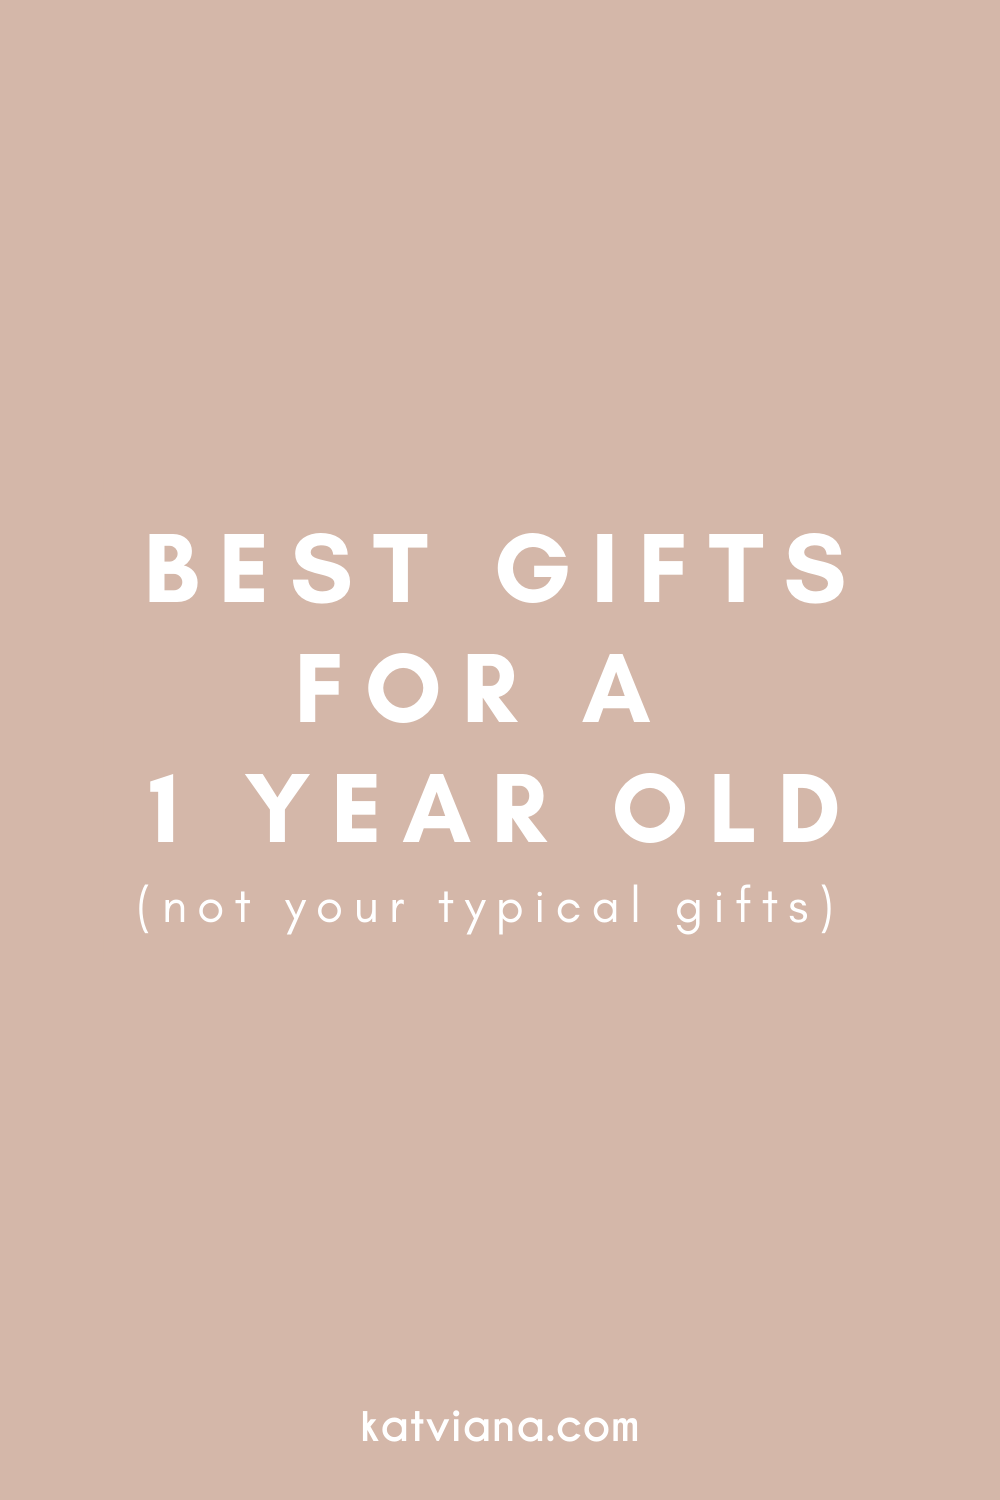 Best Gifts For A 1 Year Old | Kat Viana